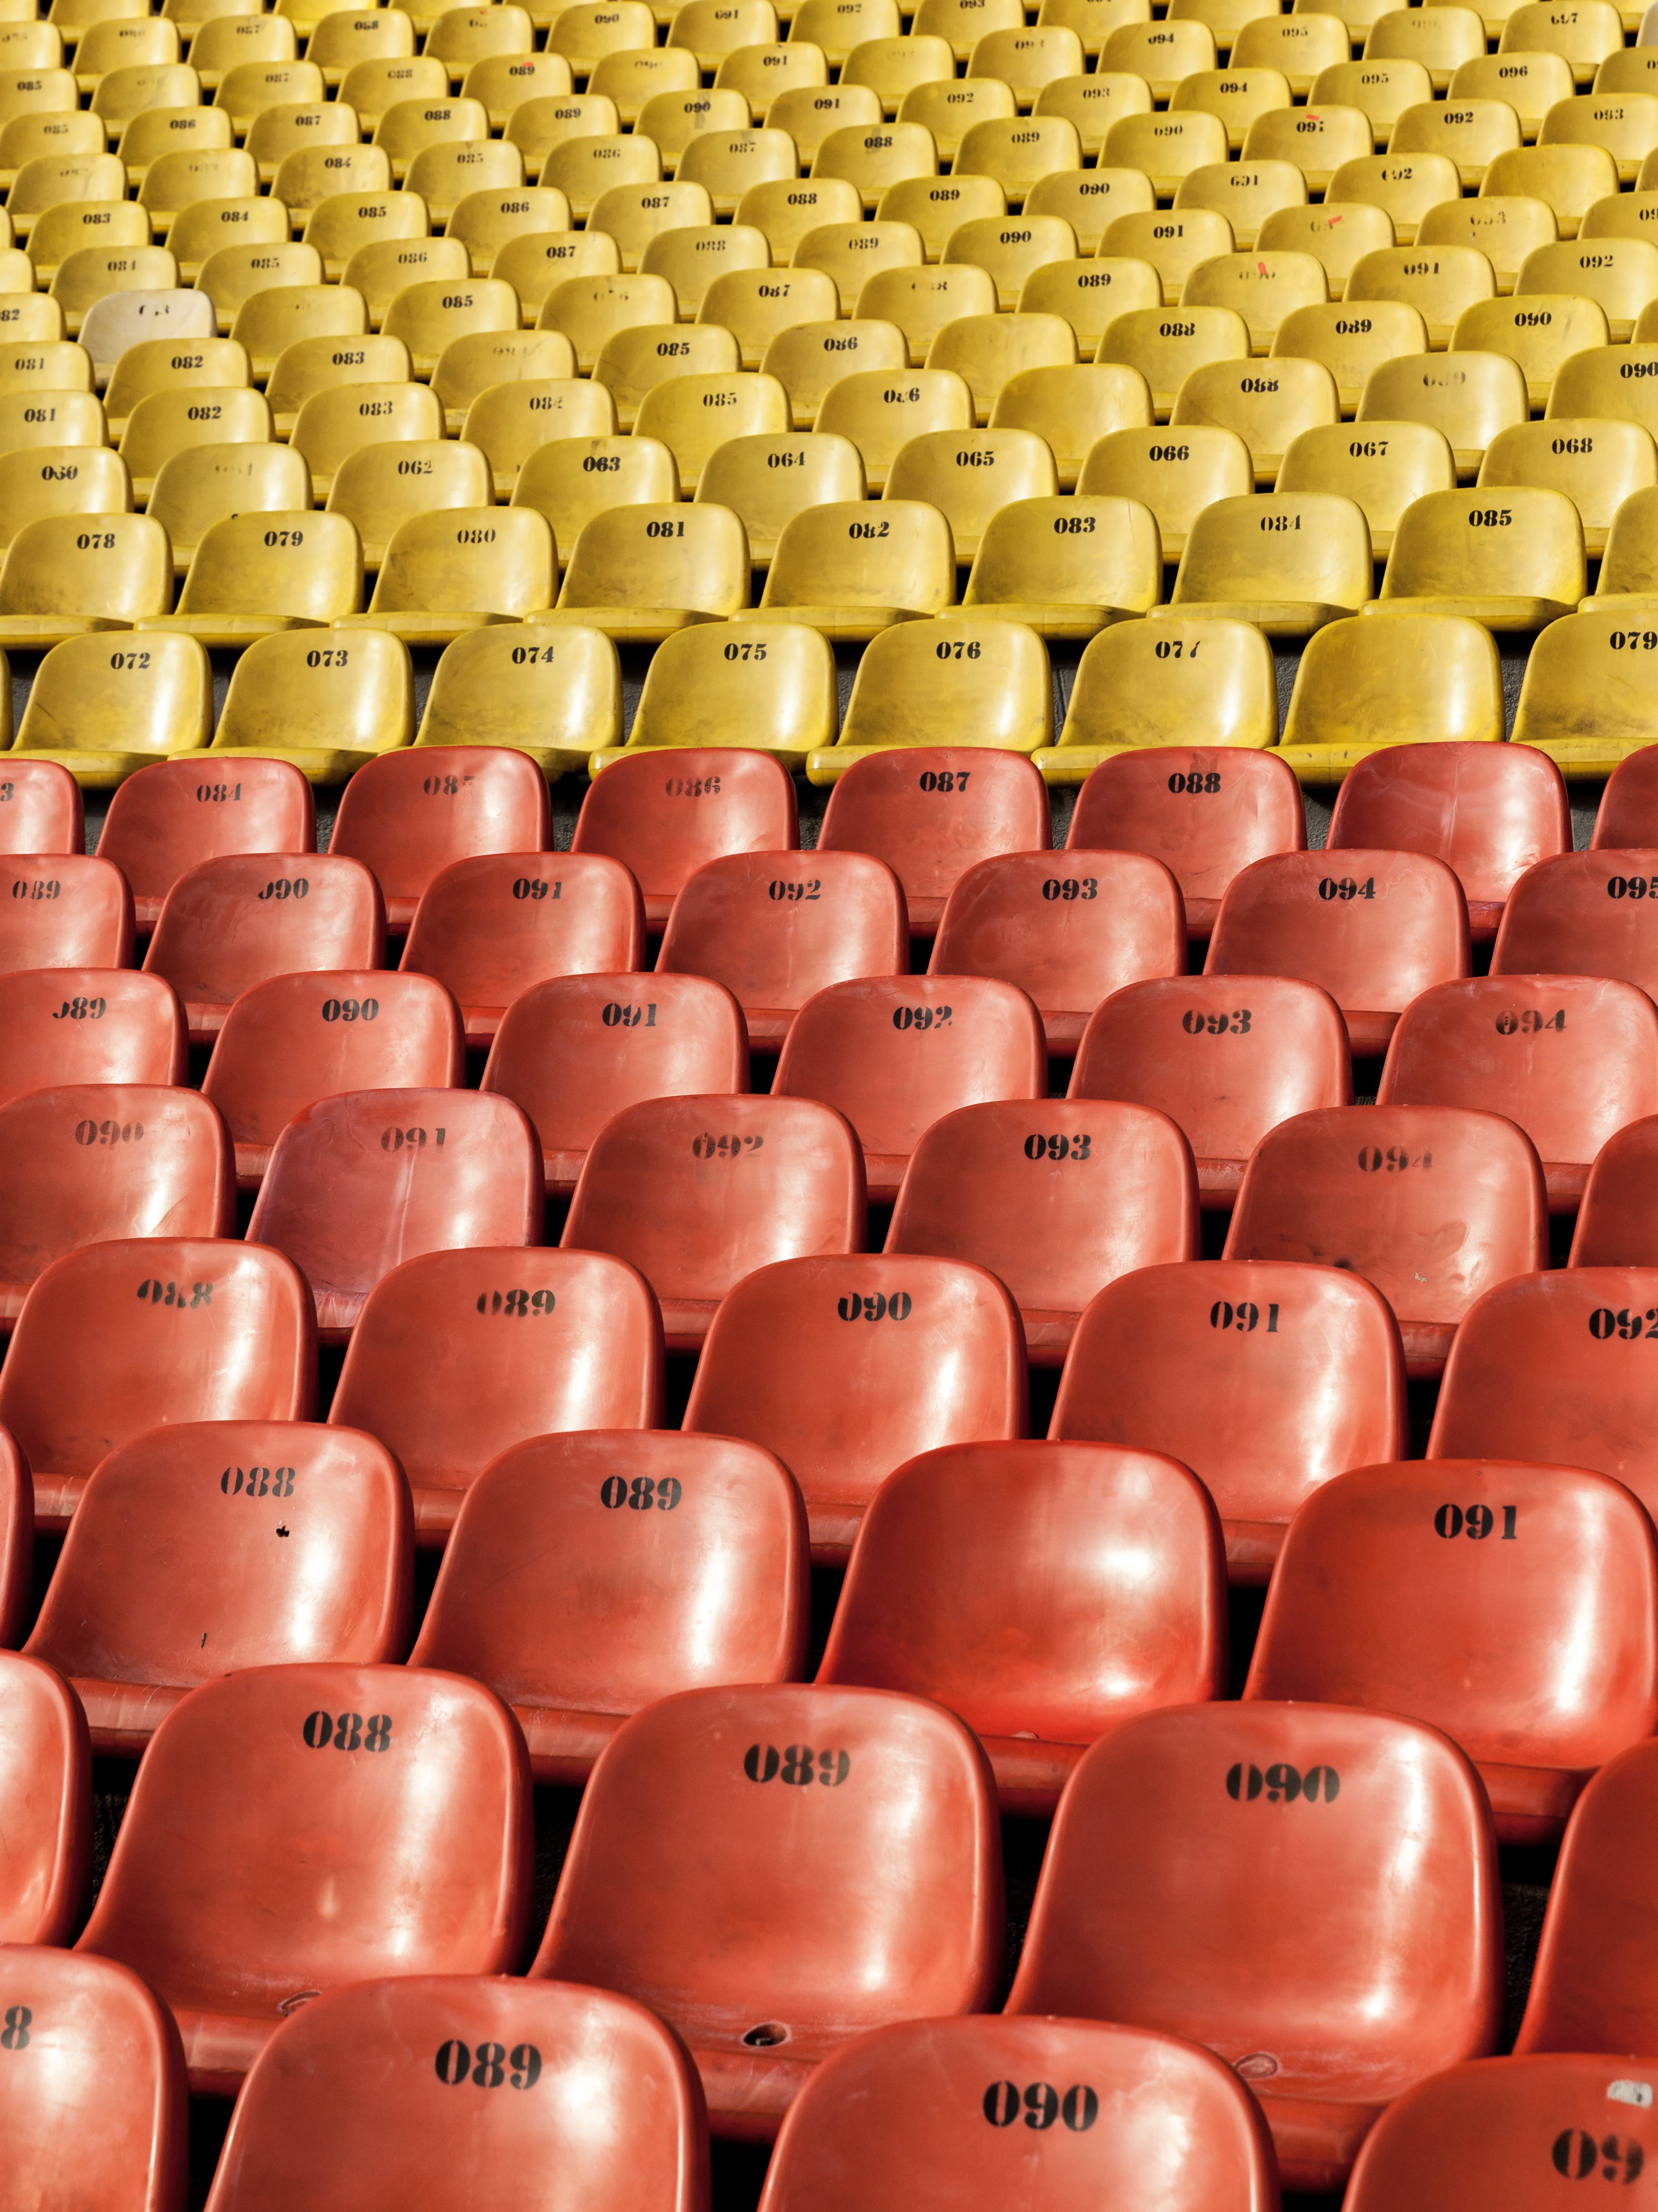 General 4096x5464 numbers colorful red yellow chair bleacher